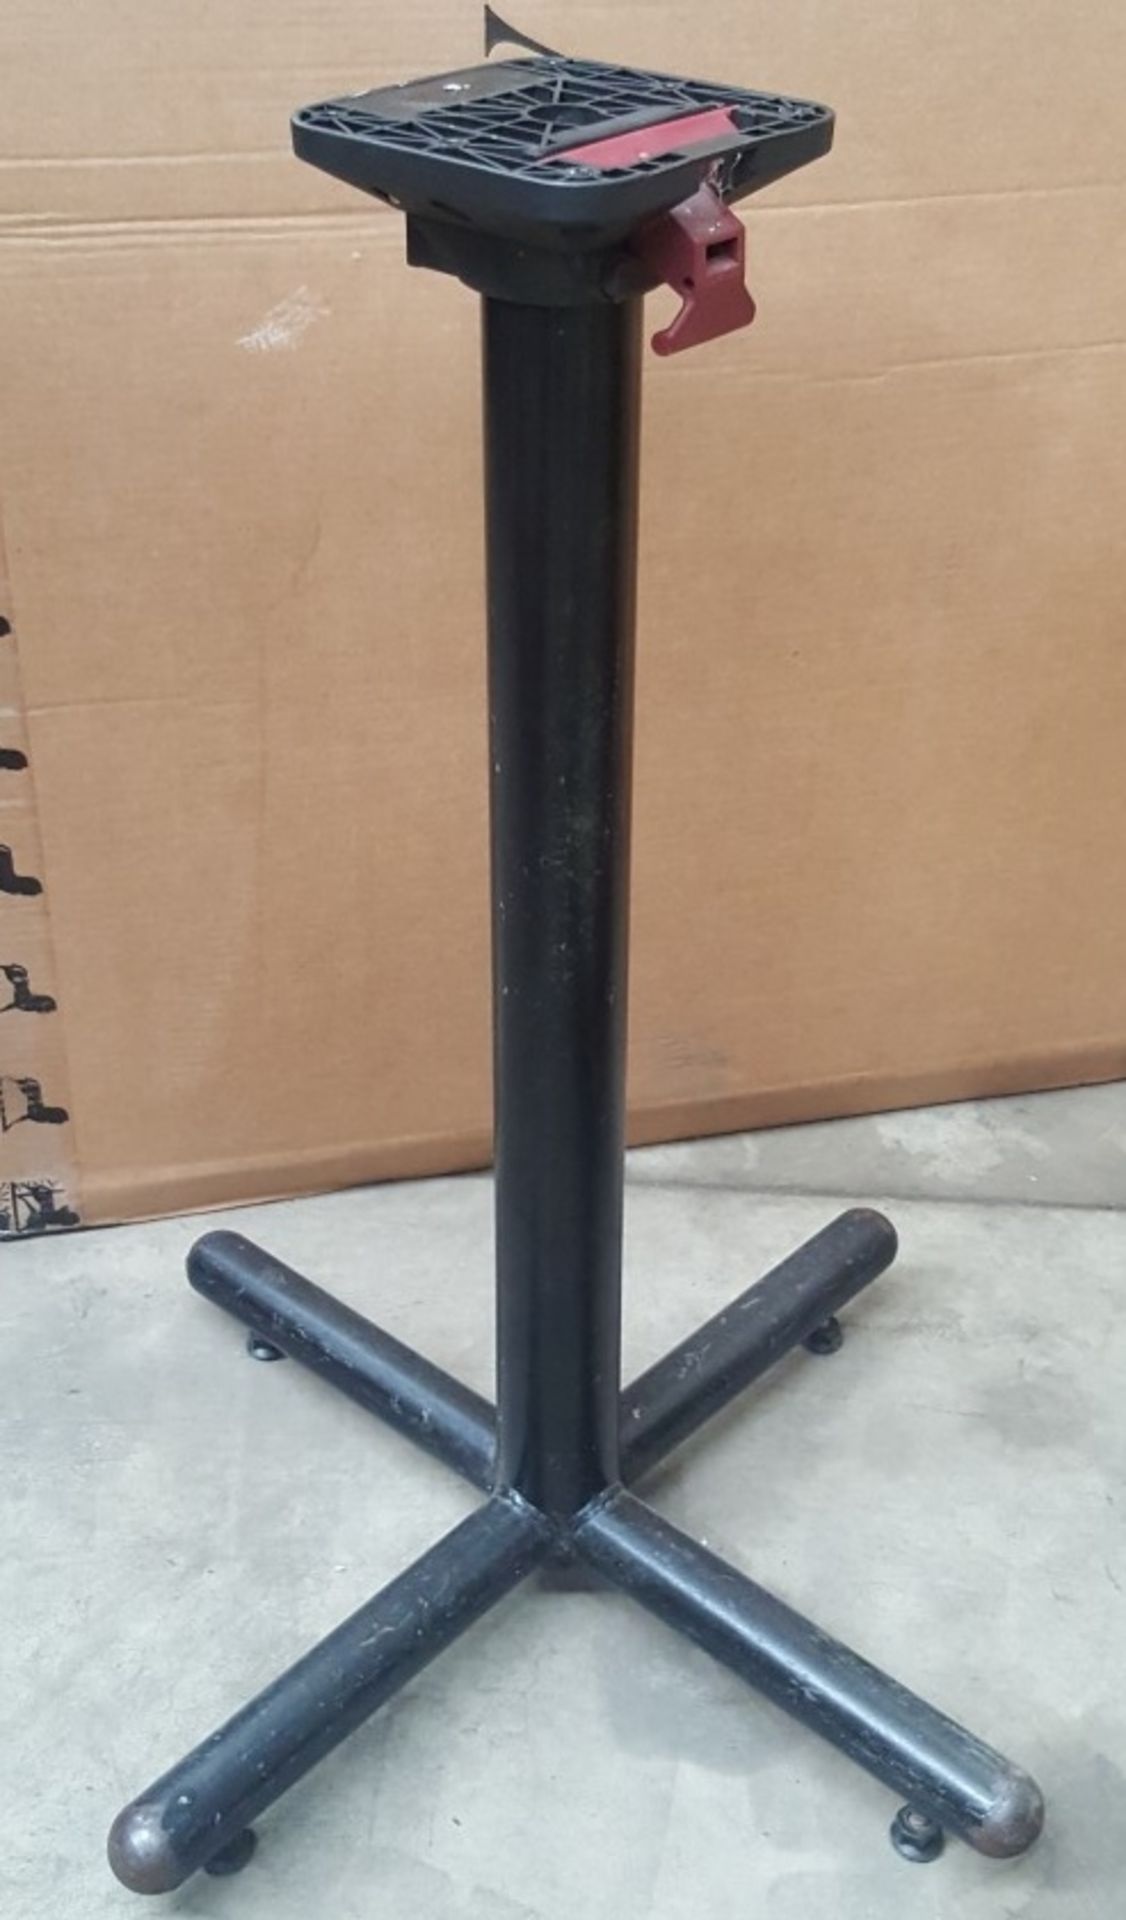 6 x 4 Cross Leg Metal Table Bases For Restaurant Tables - CL350 - Location: Altrincham WA14 - Image 3 of 4